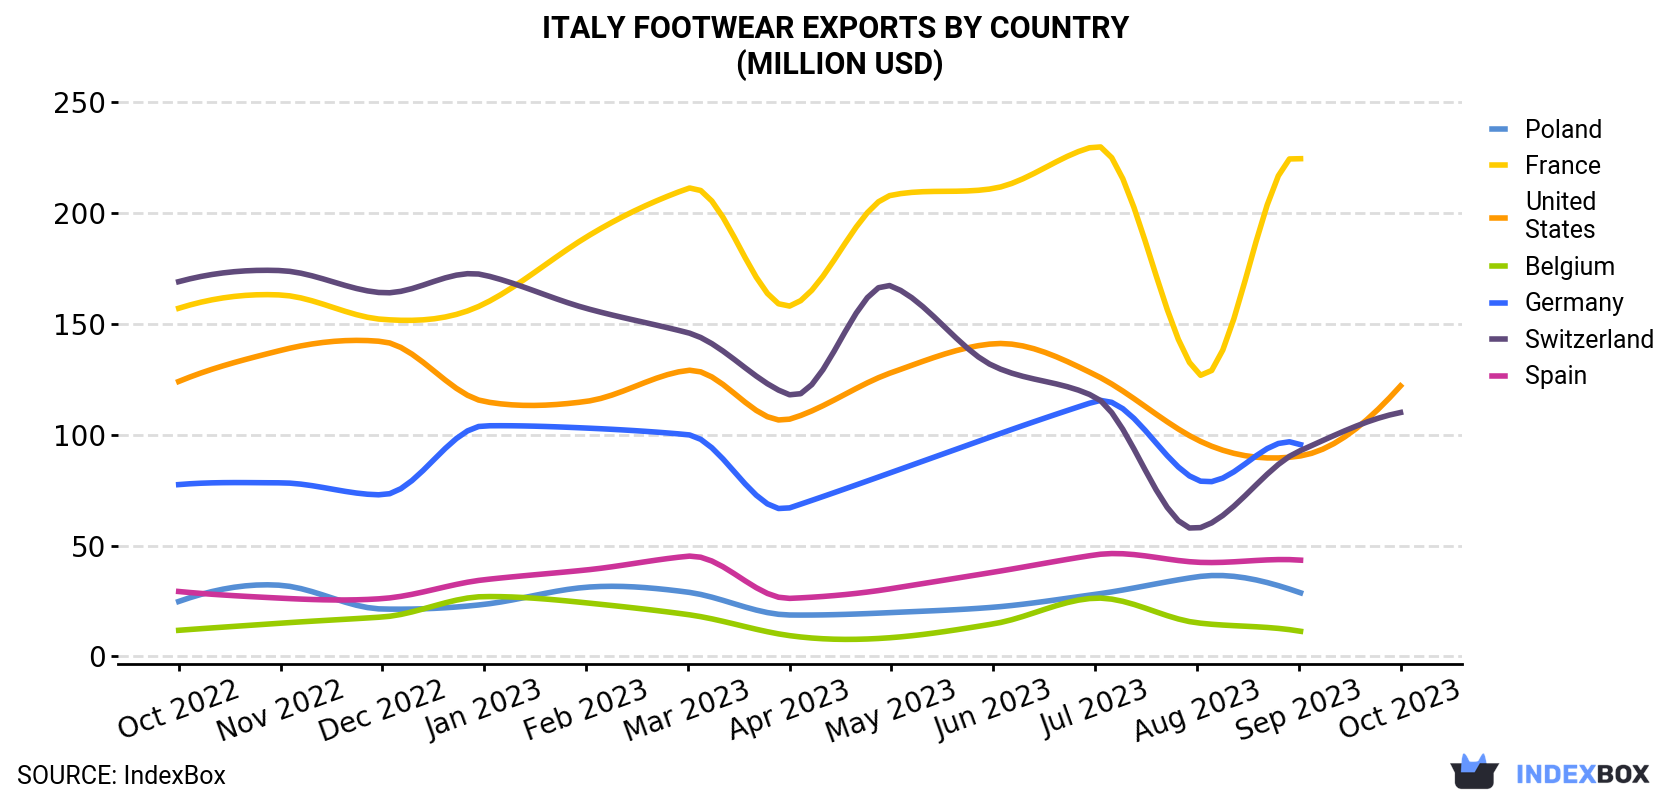 Italy Footwear Exports By Country (Million USD)